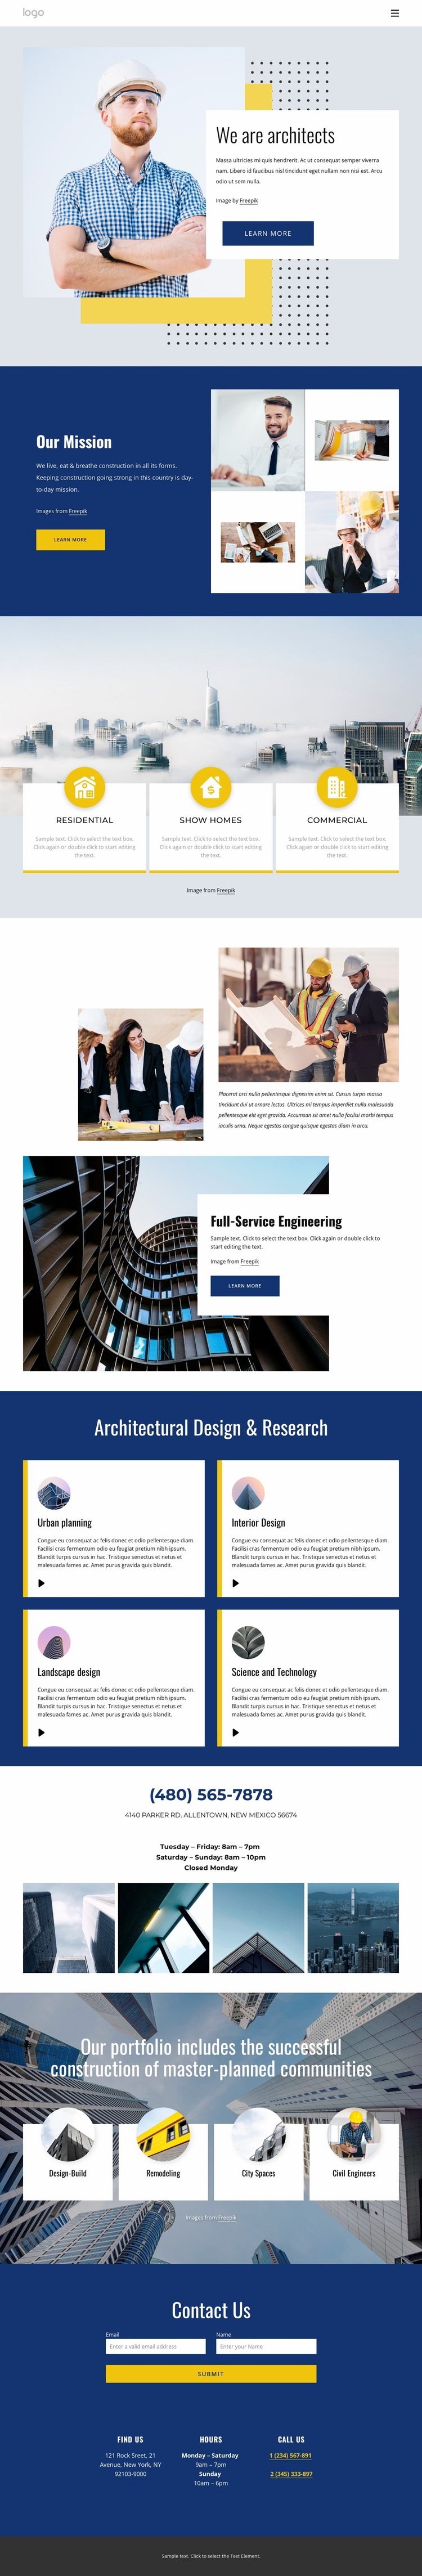 Architectural projects Homepage Design